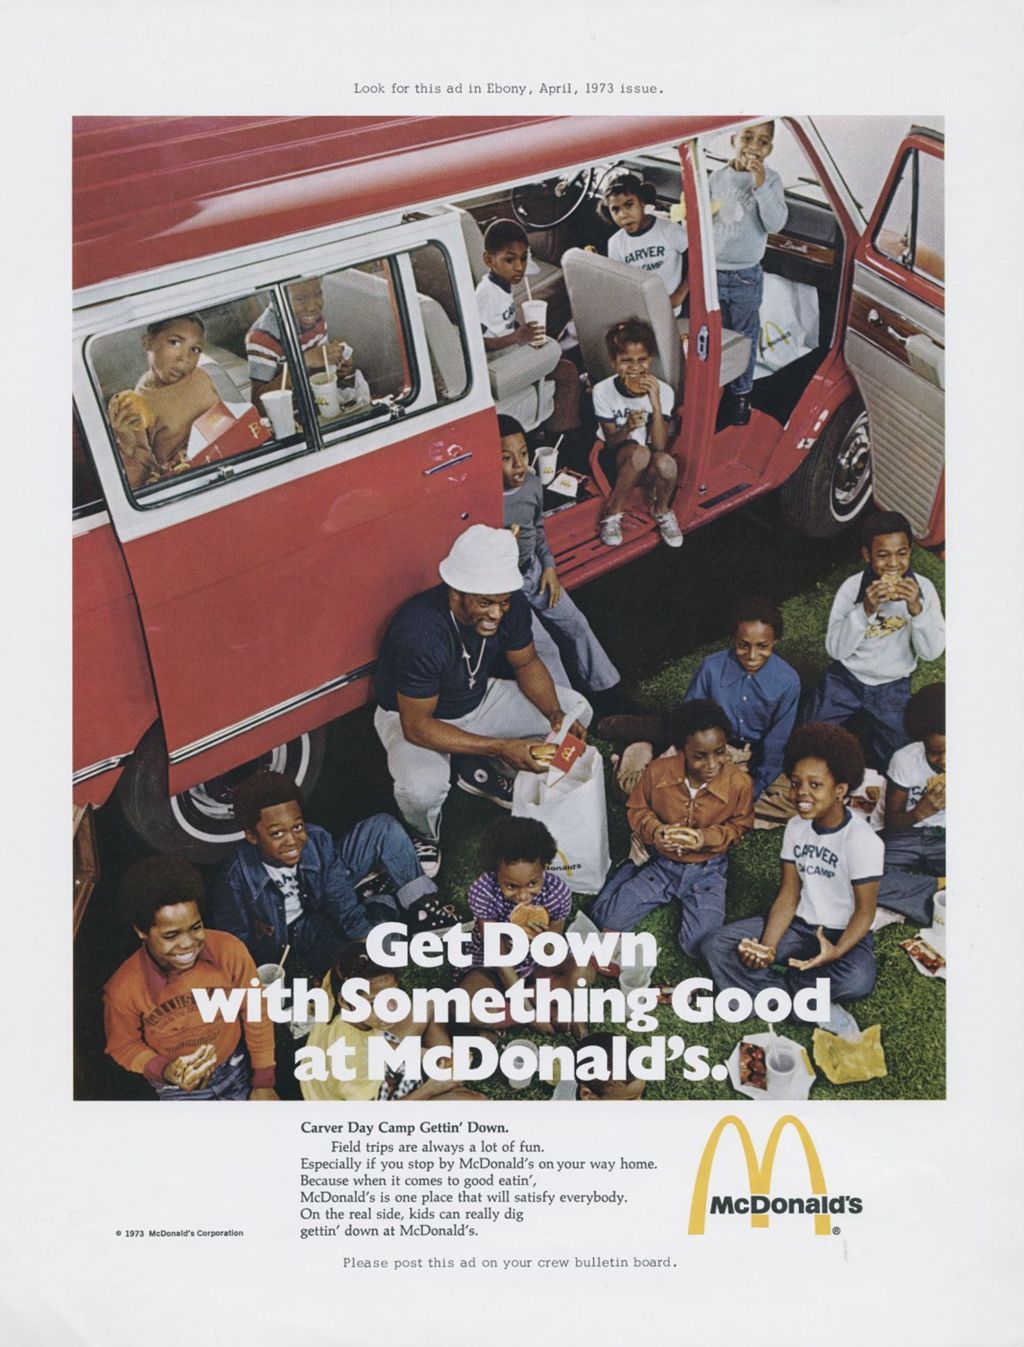 Get Down with Something Good, McDonald's advertisement